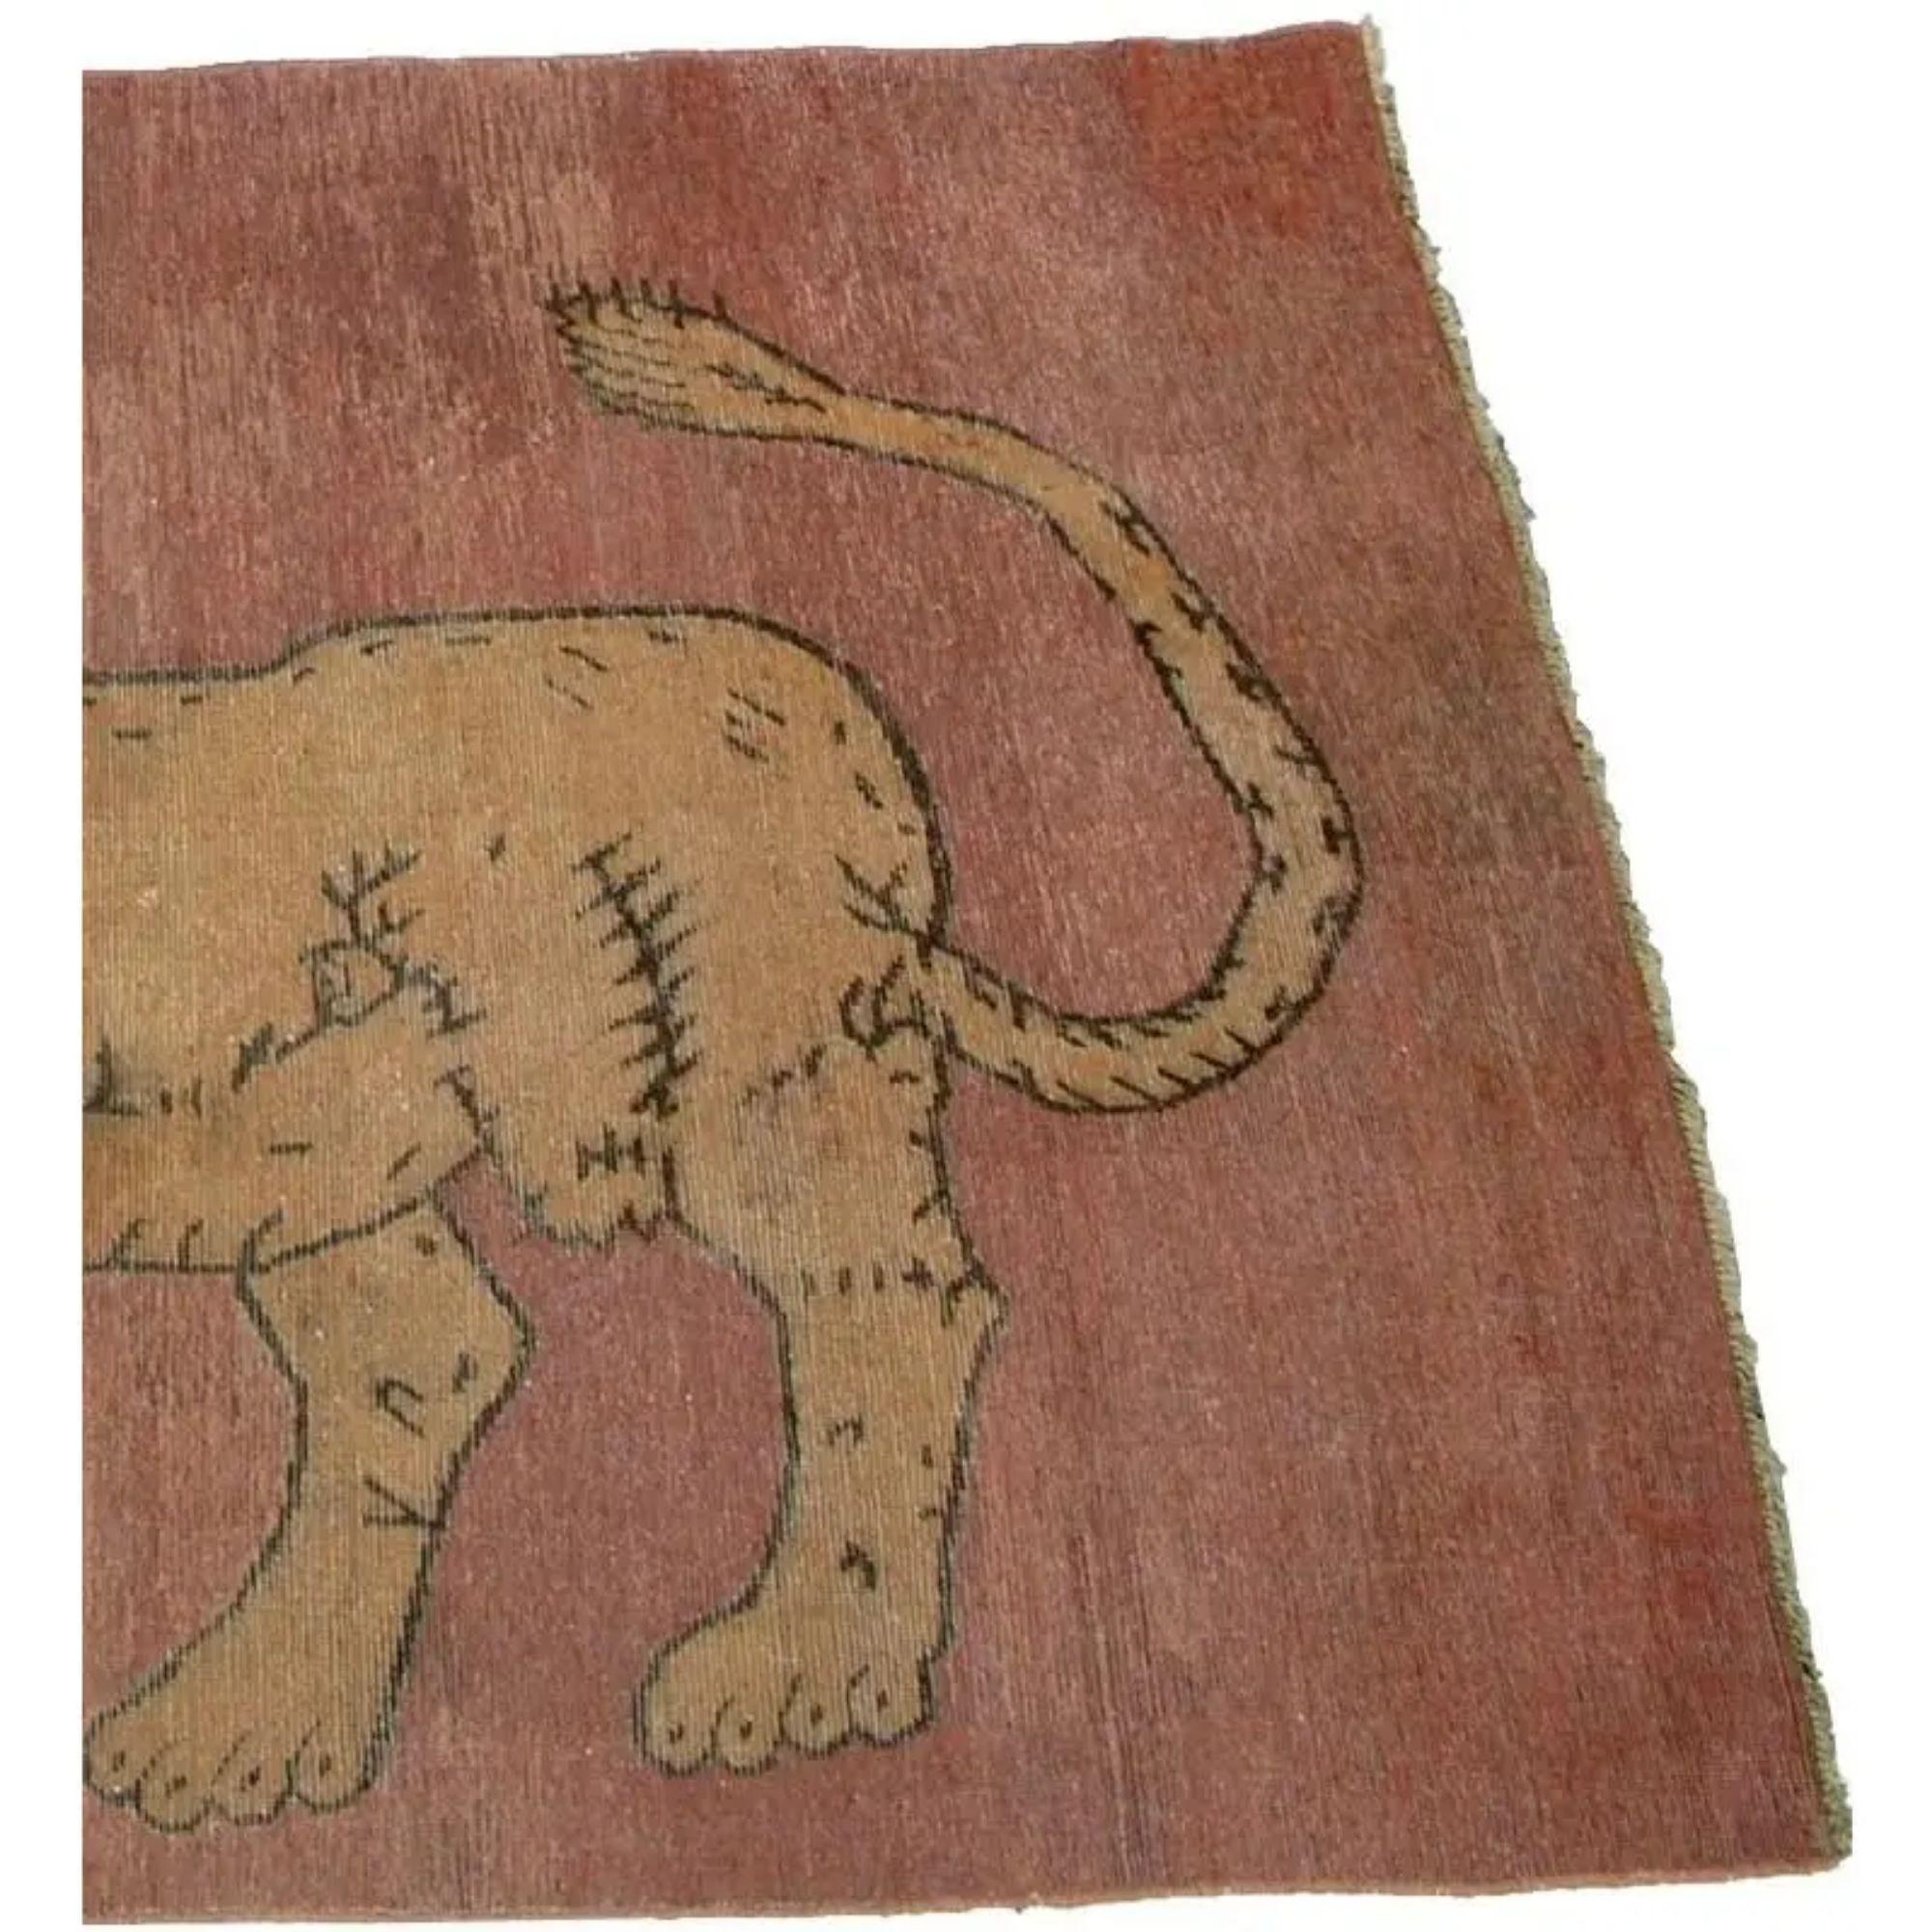 Antique Samarkand Lion Design Rug 6'6'' X 4'4'', handmade and hand-knotted,
Lion Designs are super rare and they were made by a tribes that they were worshiping Lions which we all know as a King Of Jungle. so they have made few pieces and they all